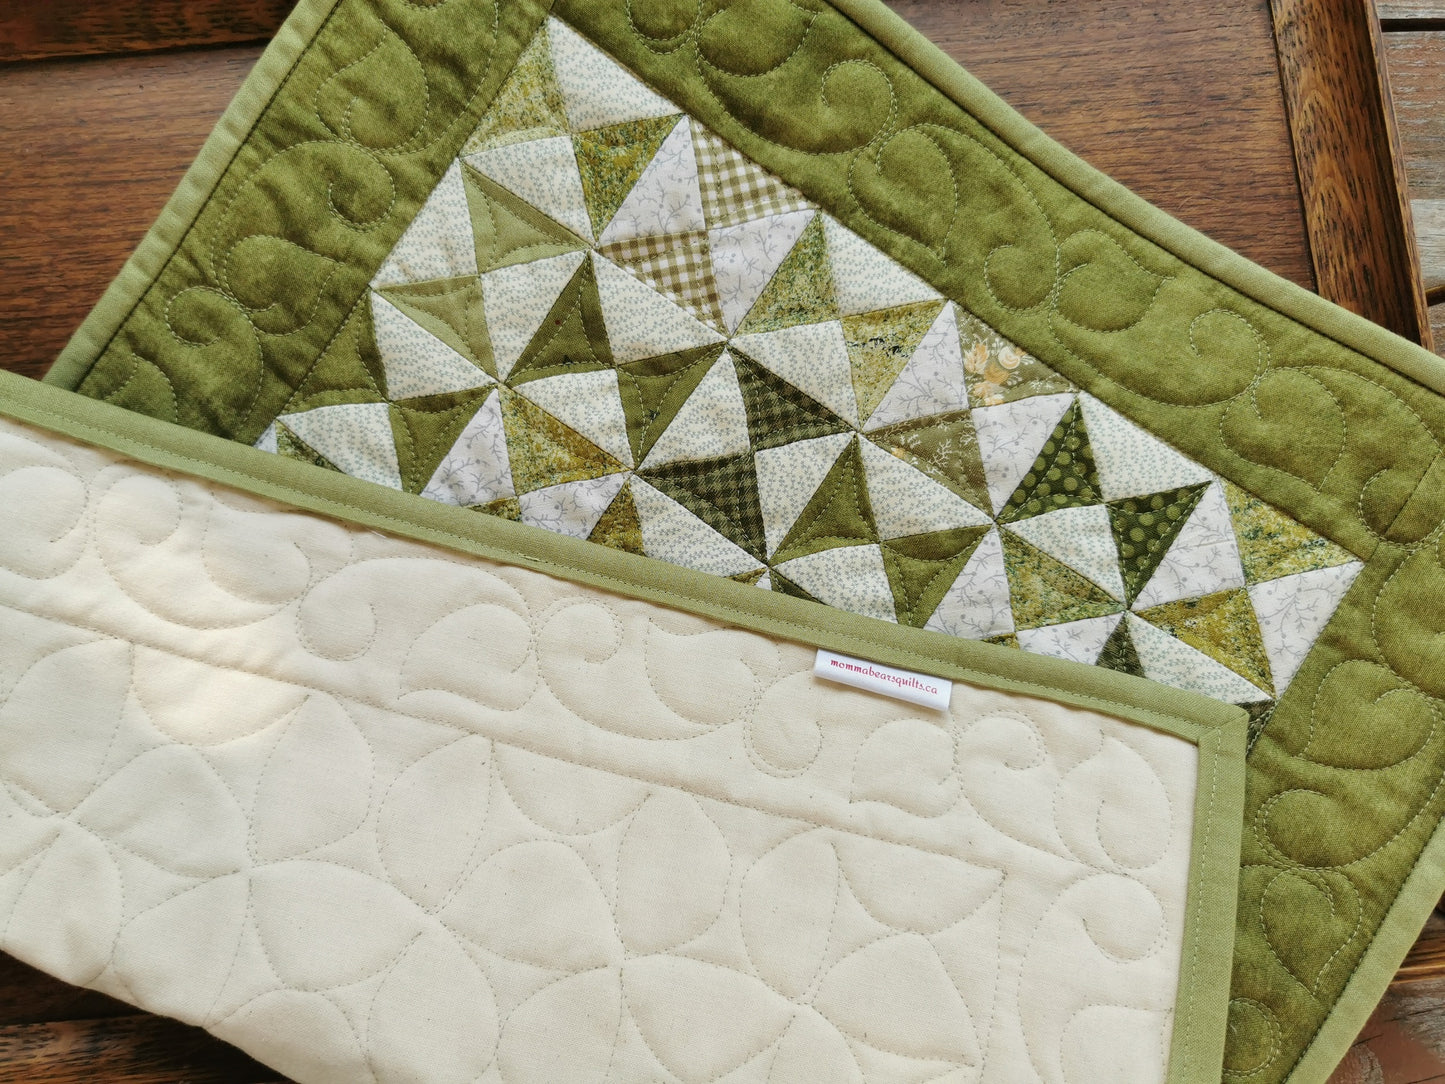 The green patchwork runner is shown on a wooden tray and folded to show the backing which is a plain, off white muslin.